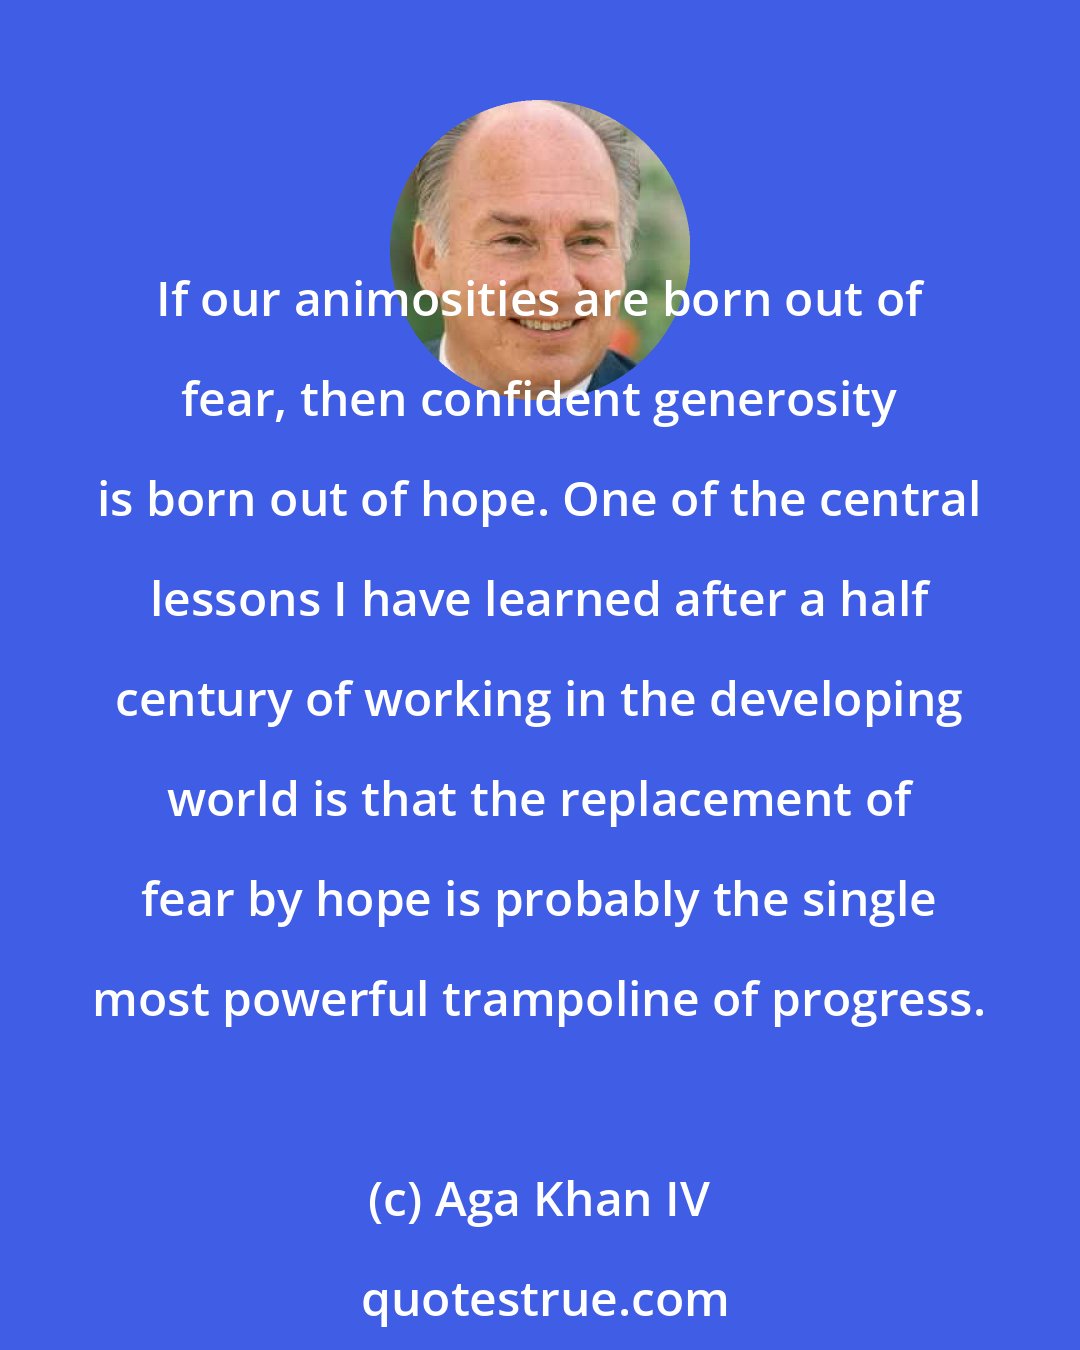 Aga Khan IV: If our animosities are born out of fear, then confident generosity is born out of hope. One of the central lessons I have learned after a half century of working in the developing world is that the replacement of fear by hope is probably the single most powerful trampoline of progress.